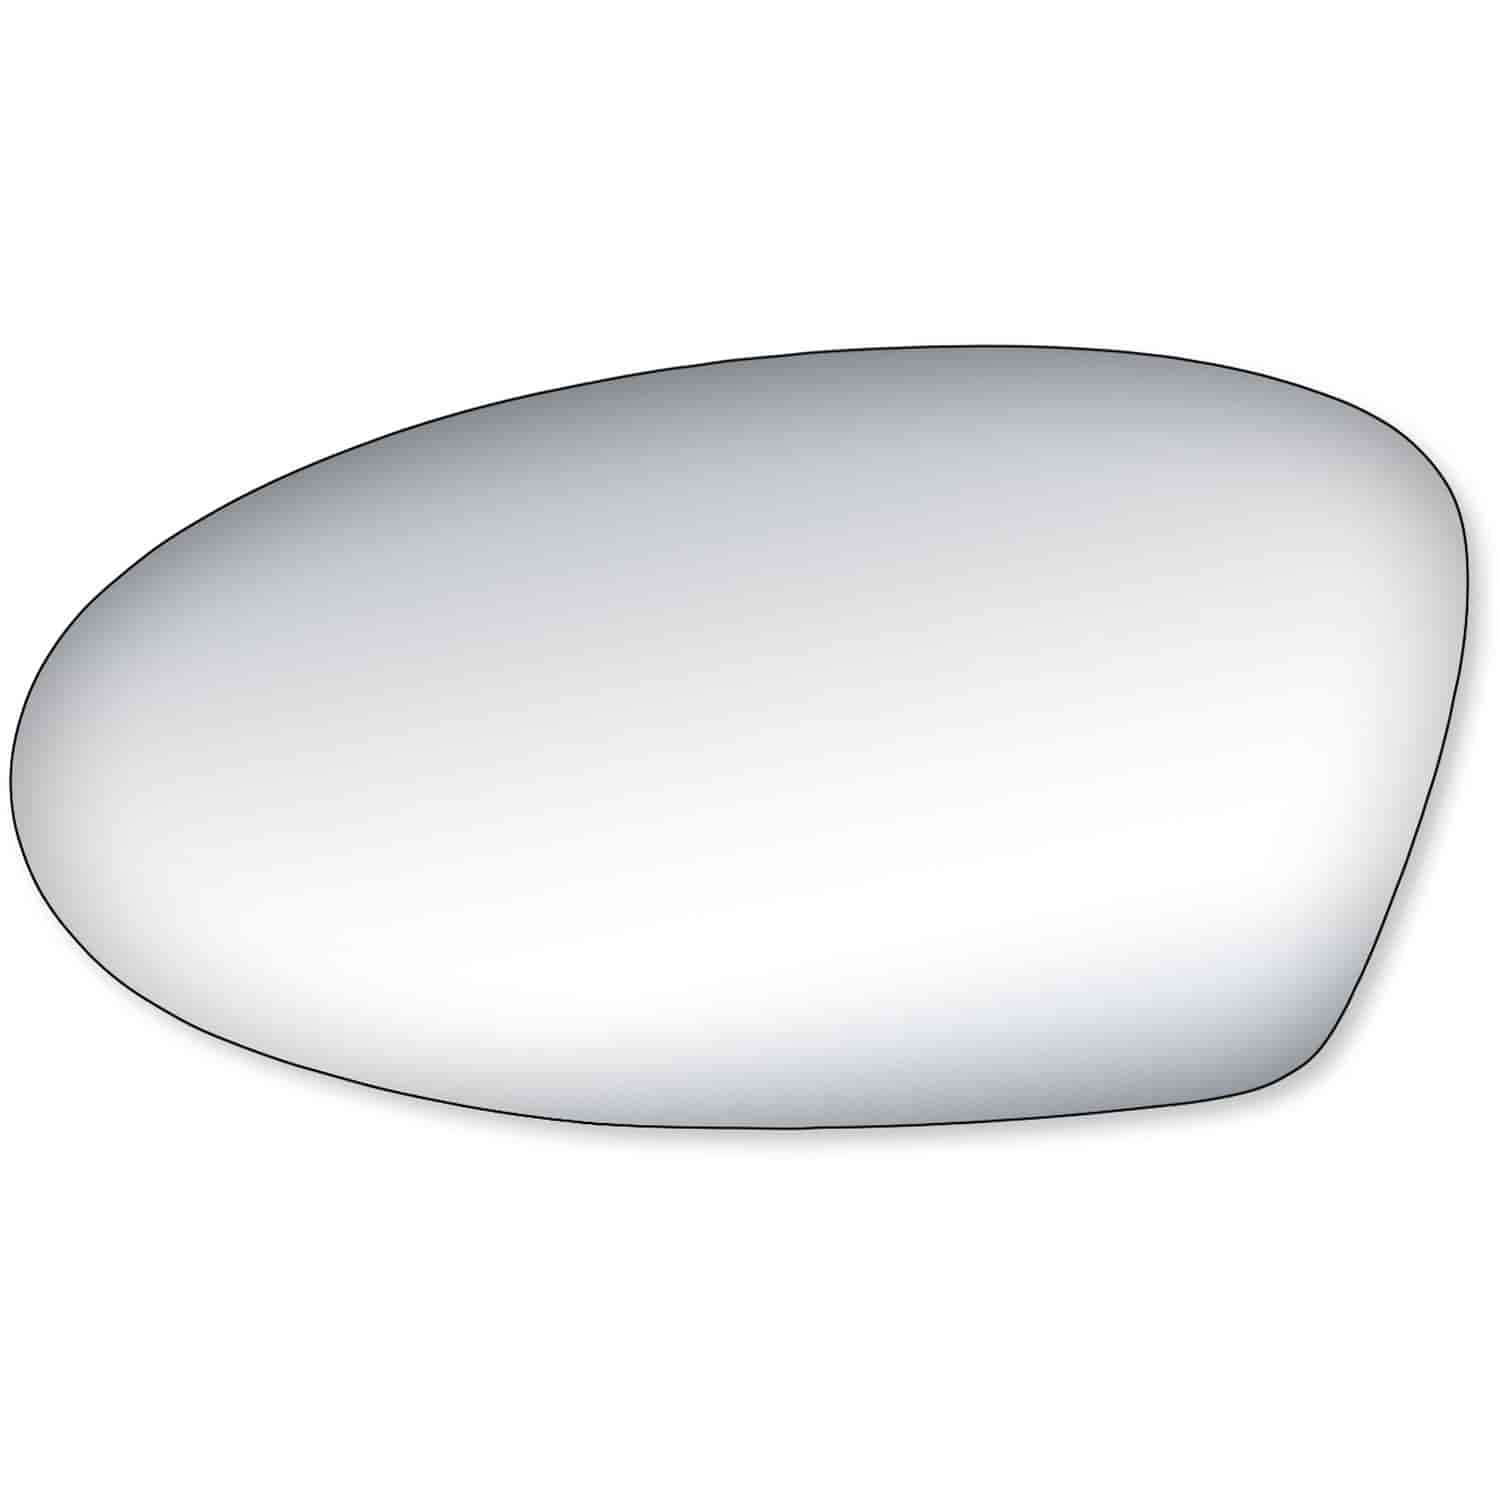 Replacement Glass for 99-04 Alero; 02-05 Grand Am the glass measures 4 1/16 tall by 7 3/4 wide and 7